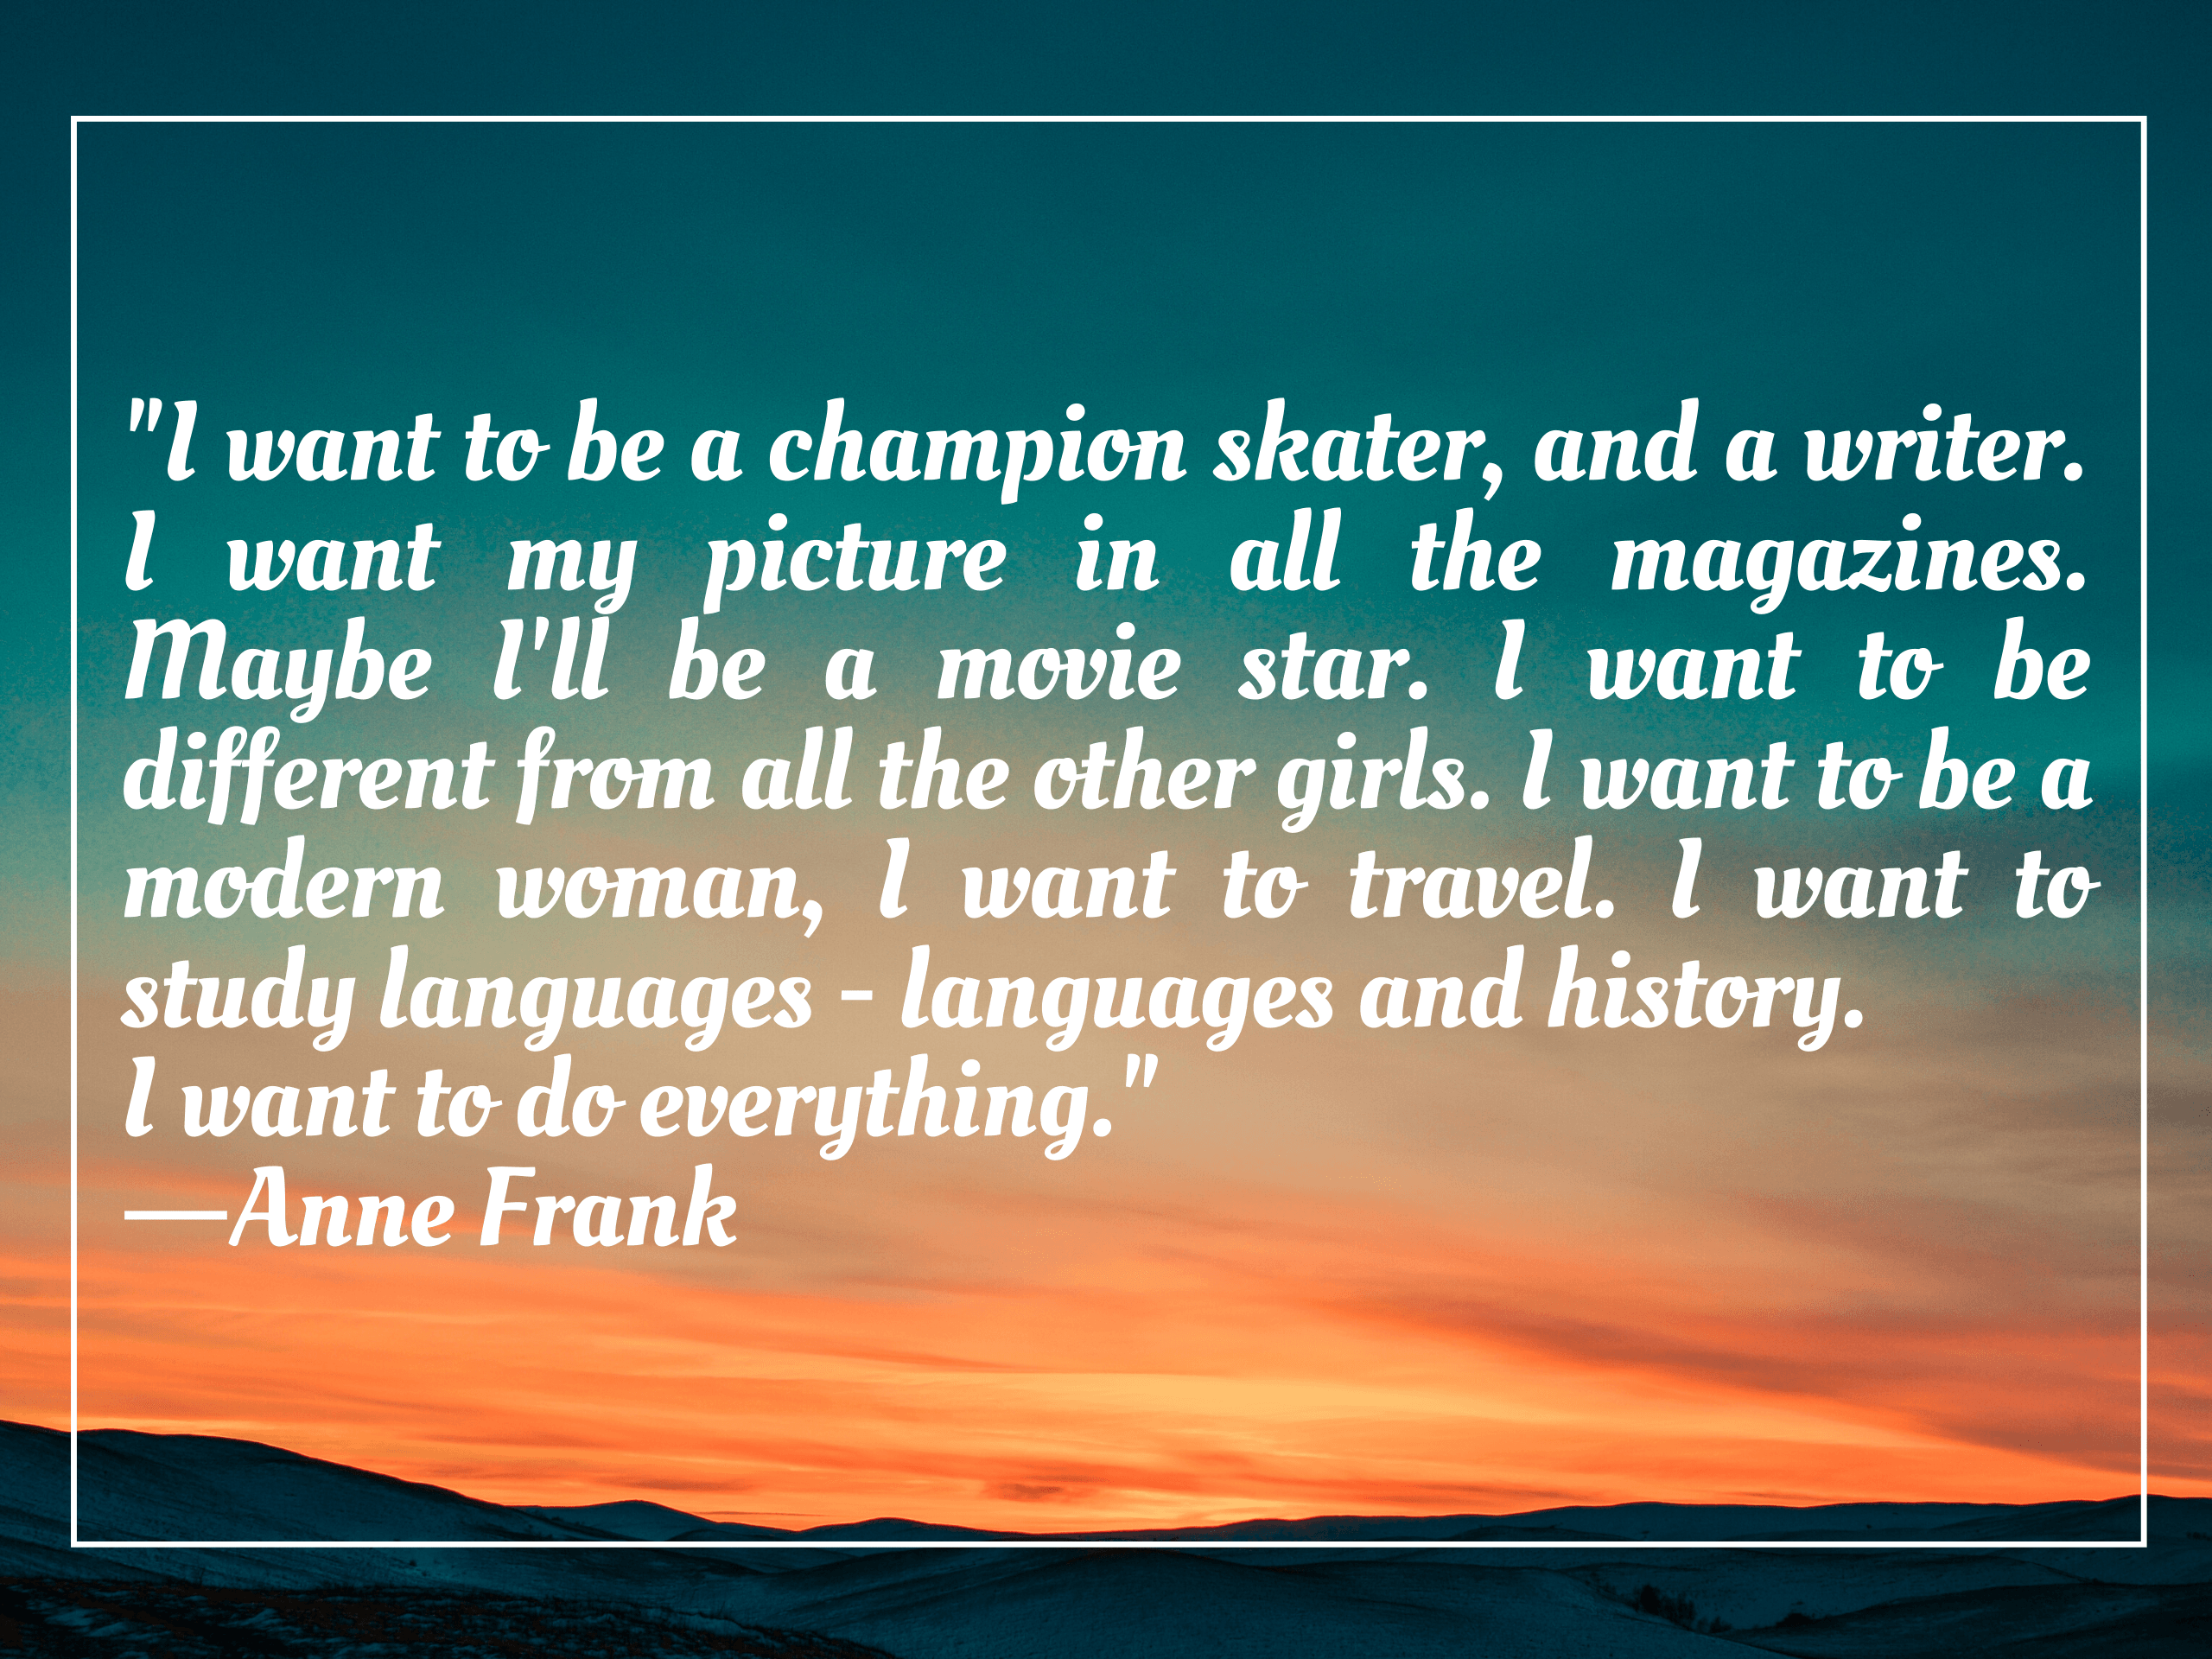 Quote from Anne Frank